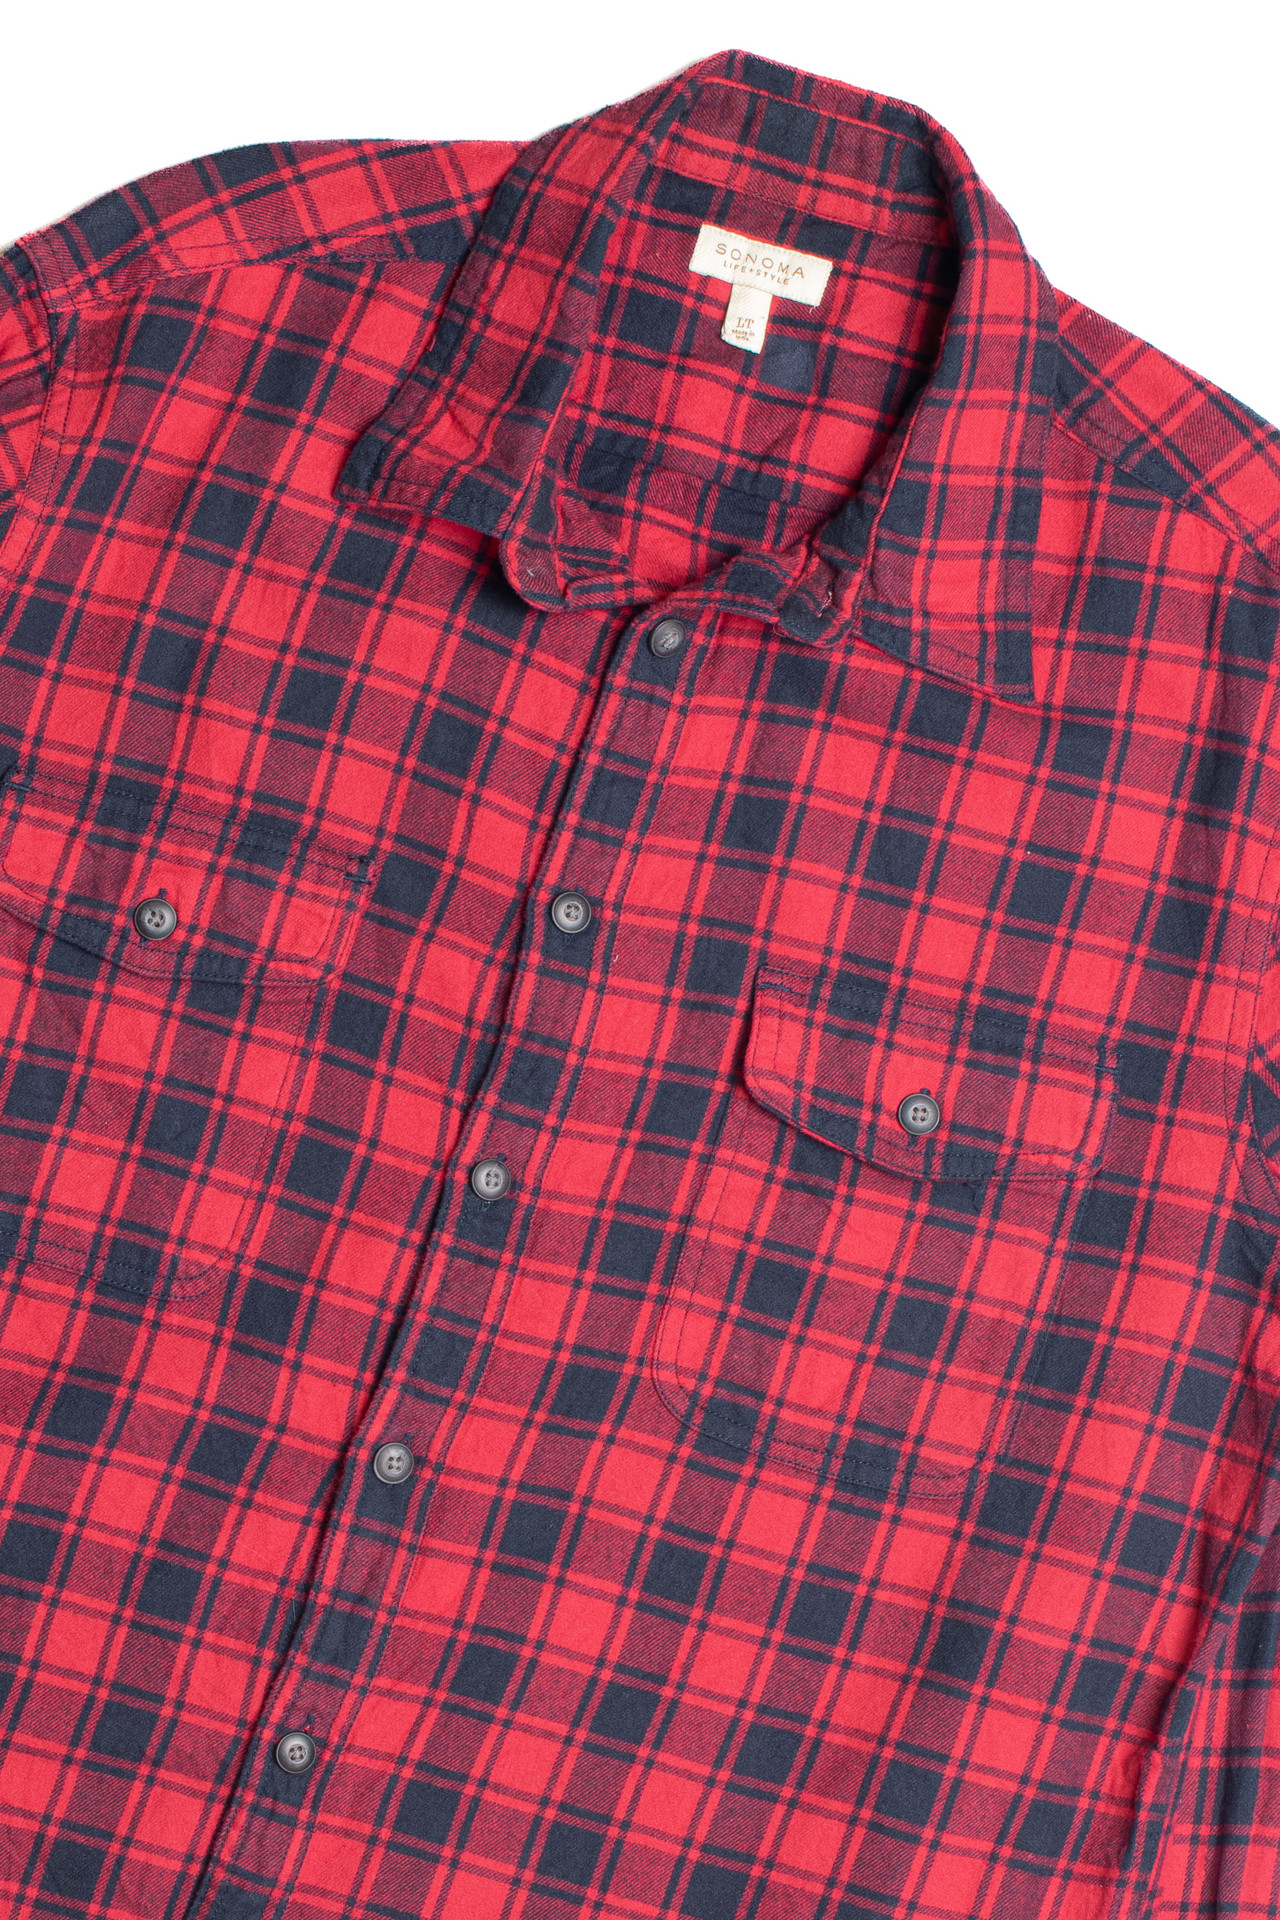 Recycled + Vintage Clothing - Vintage Flannel Shirts - Page 1 ...